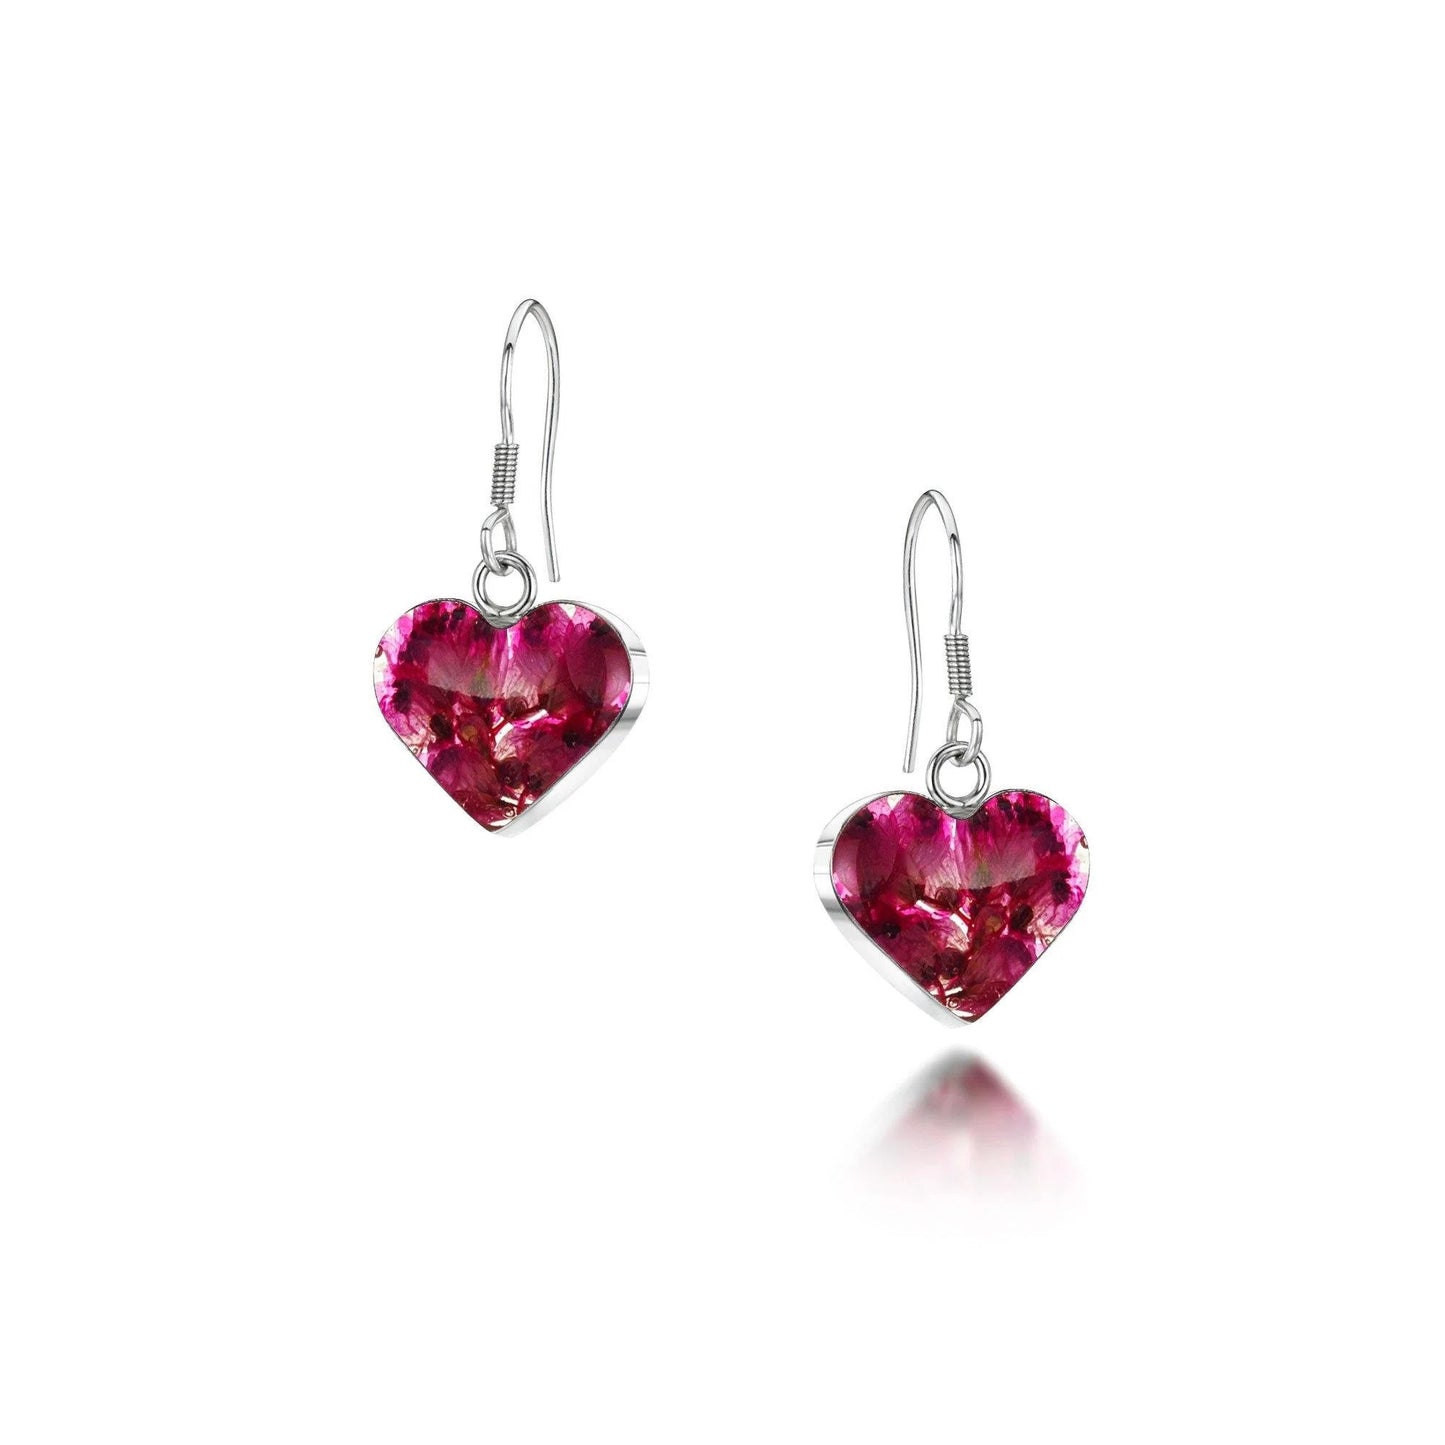 Sterling Silver Heart Dangle Earrings with real heather flowers